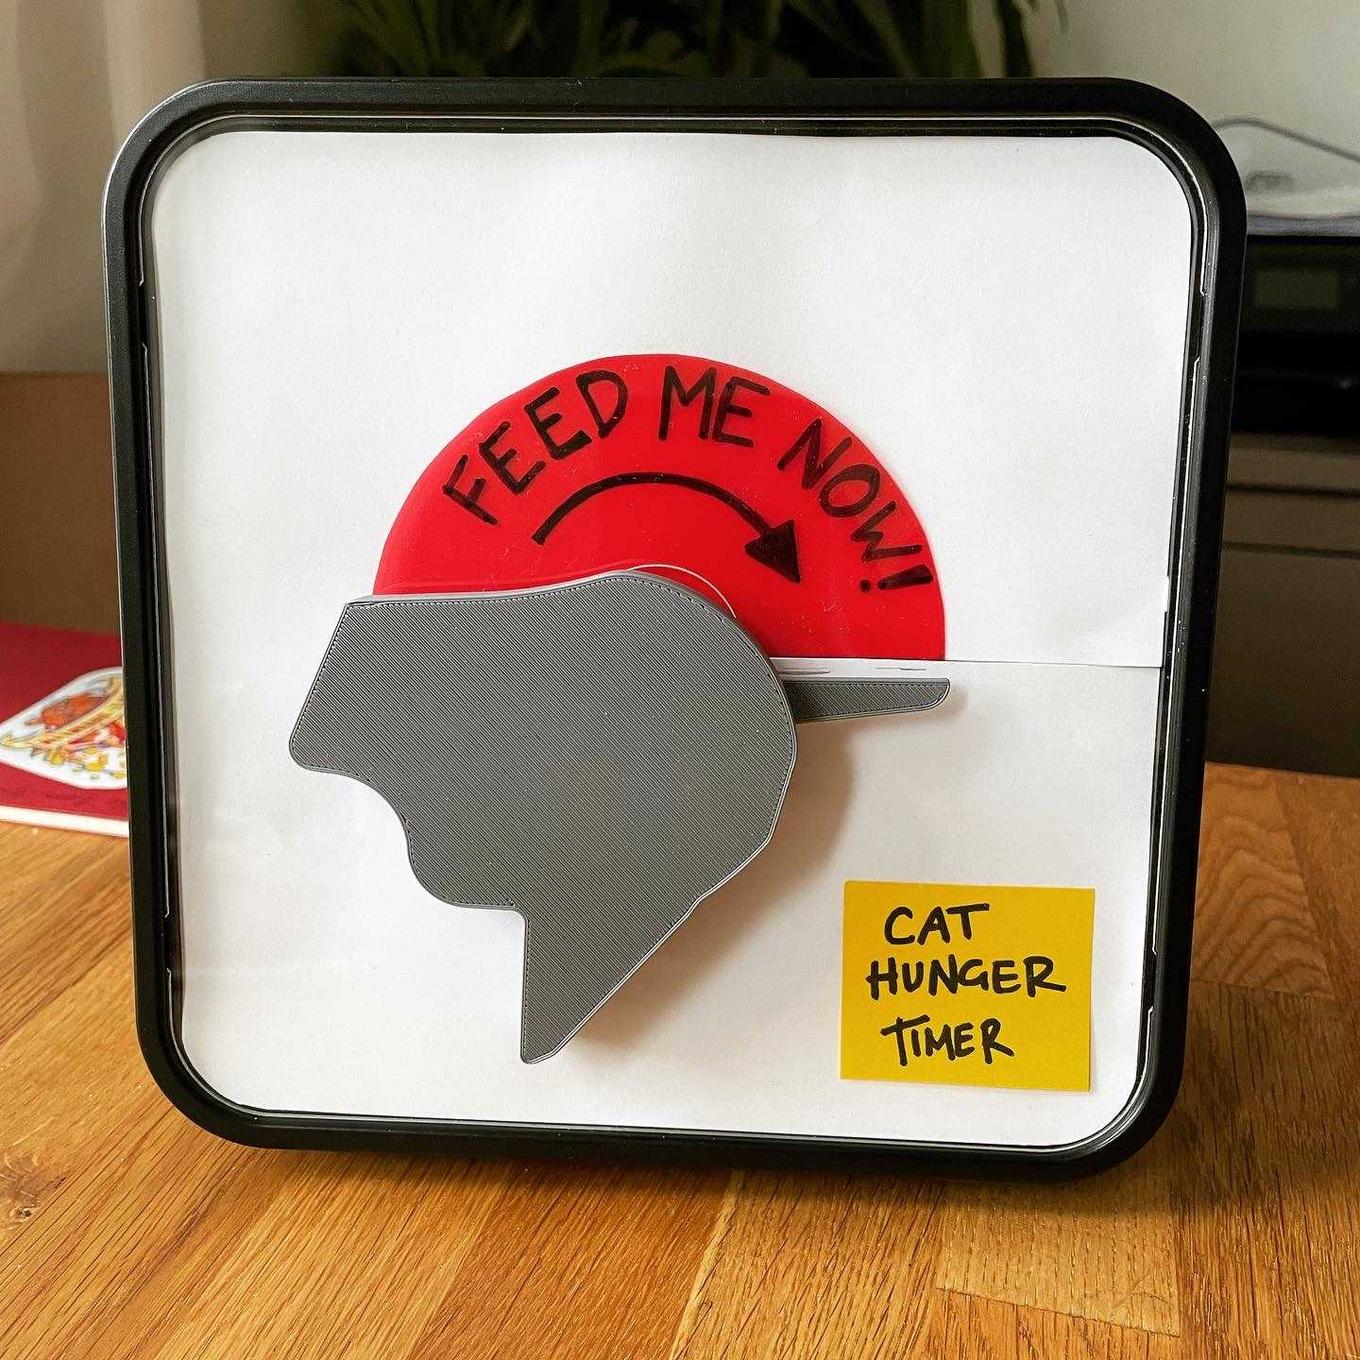 Image of a timer where the dial is a cat head. The mouth is open to 180 degrees, showing a red panel reading "FEED ME NOW!".